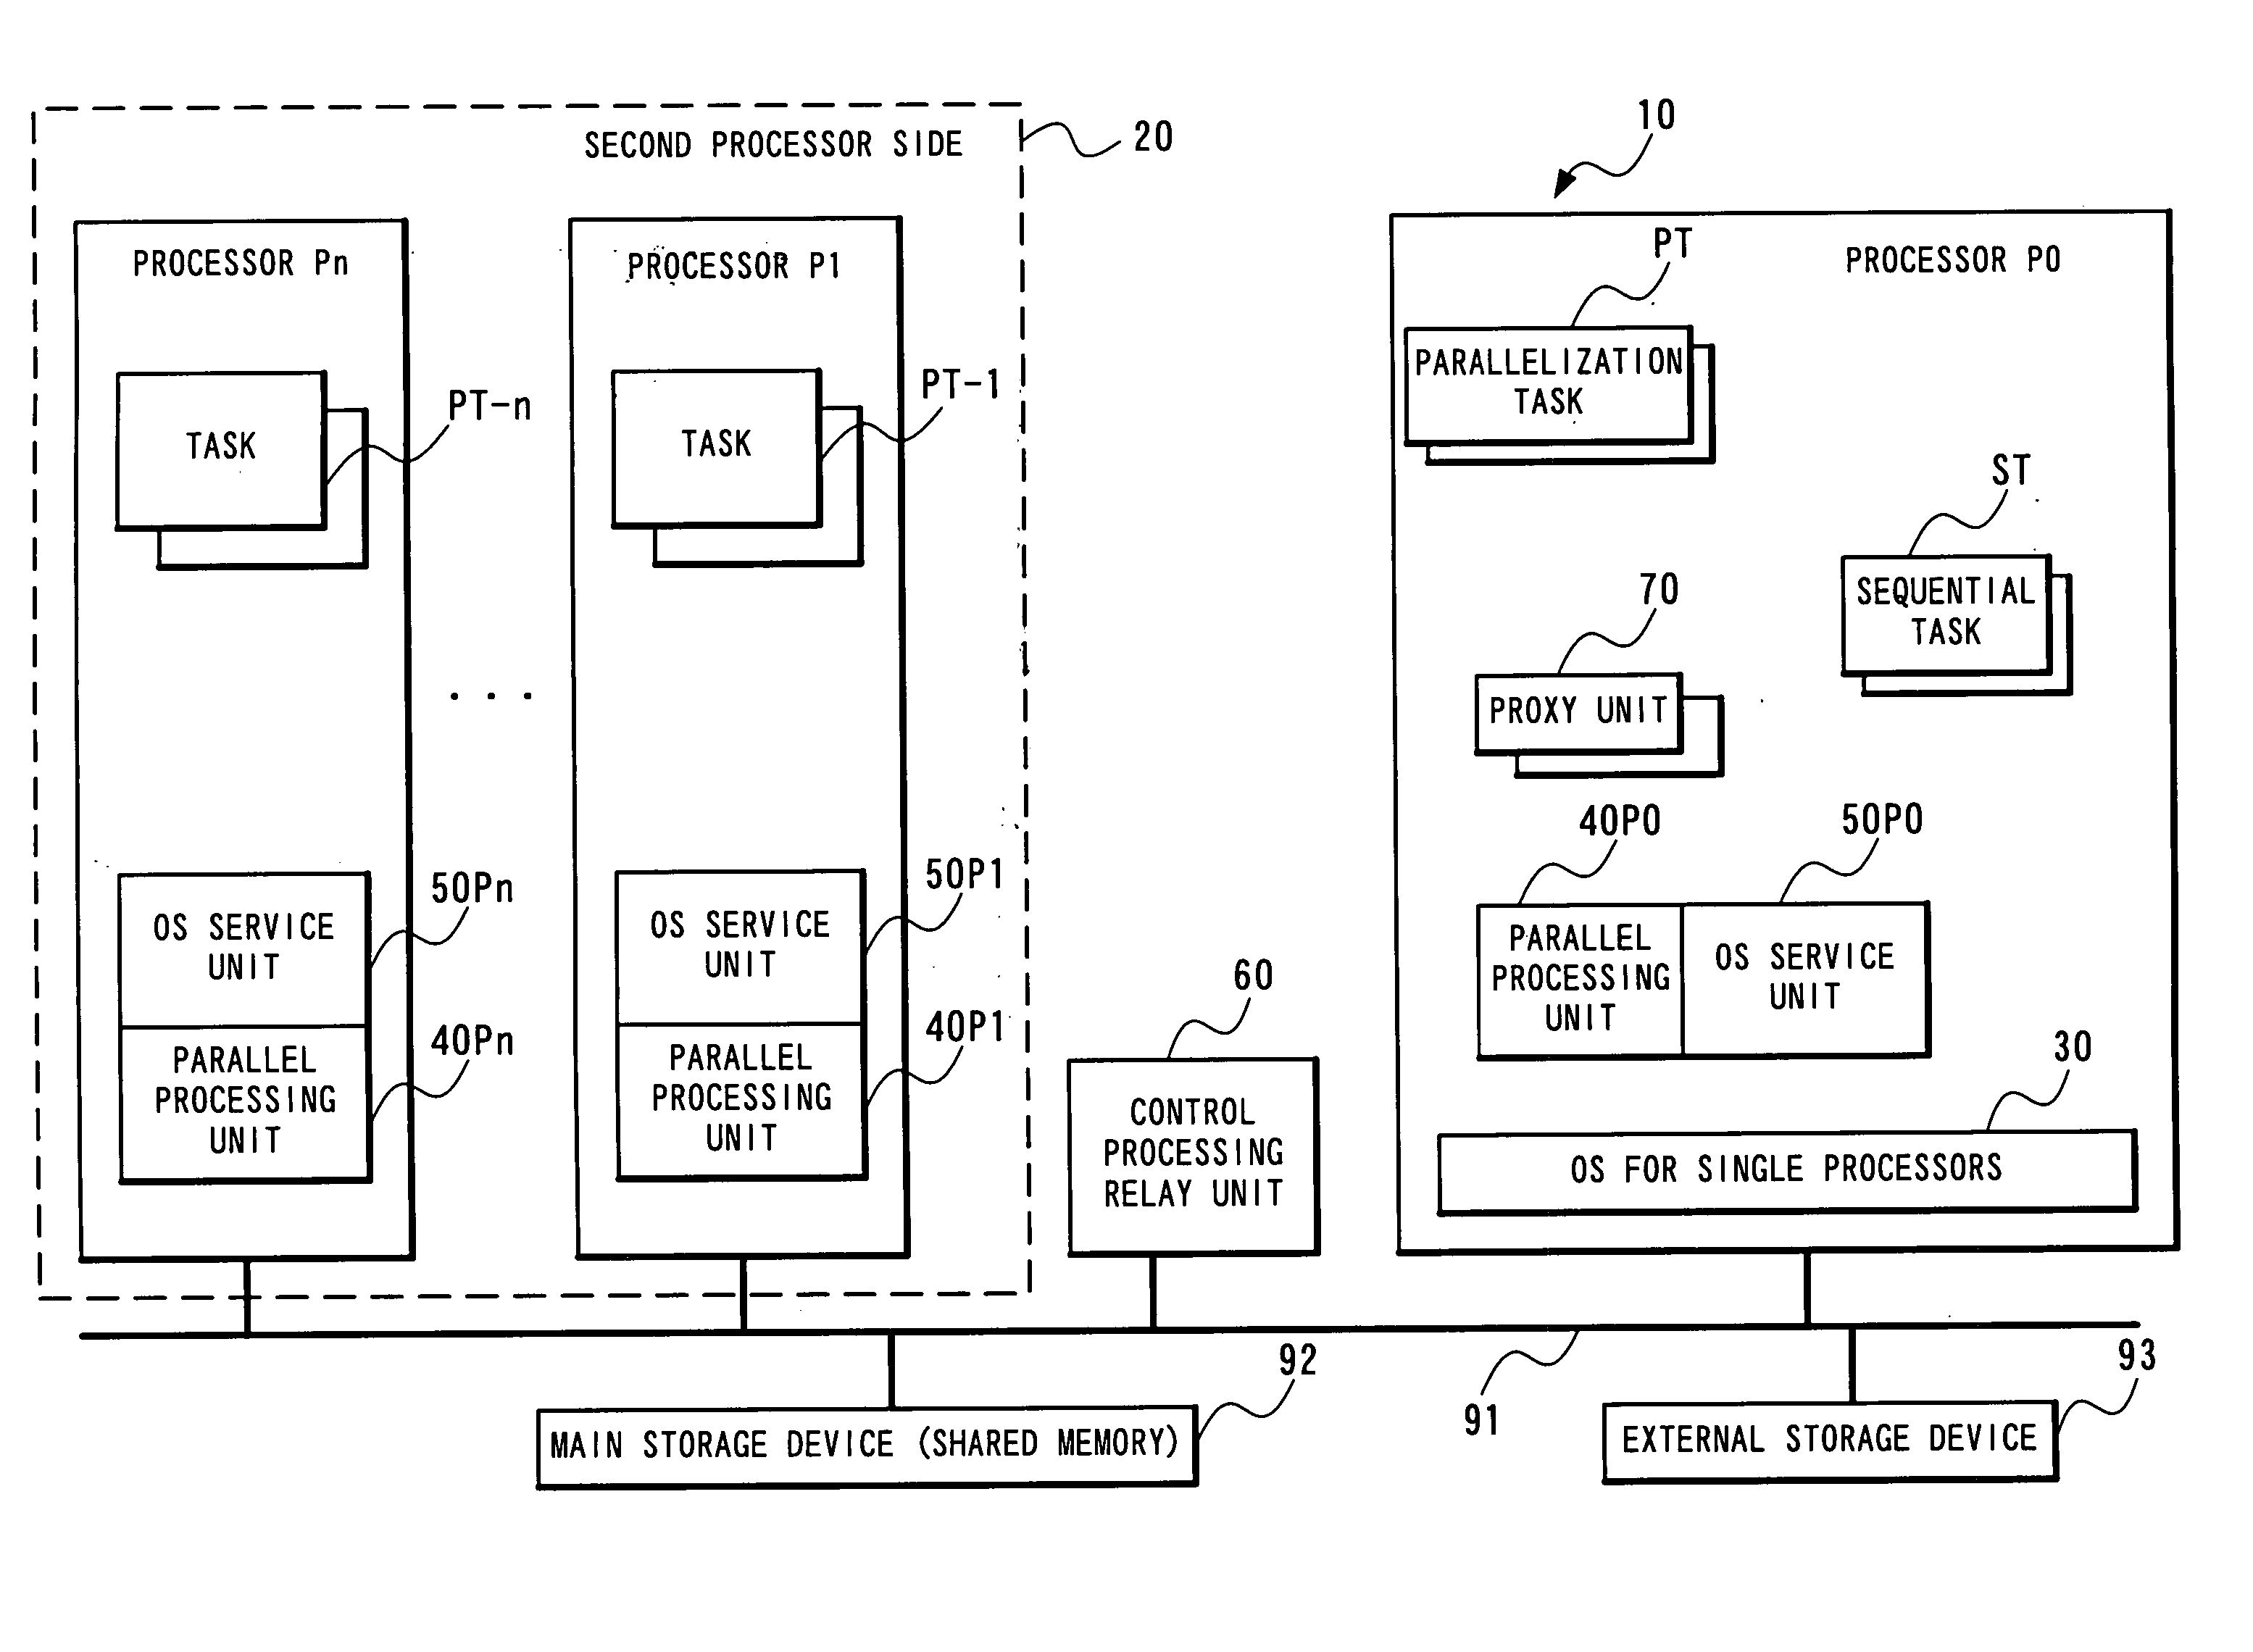 Inter-processor communication system in parallel processing system by OS for single processors and program thereof